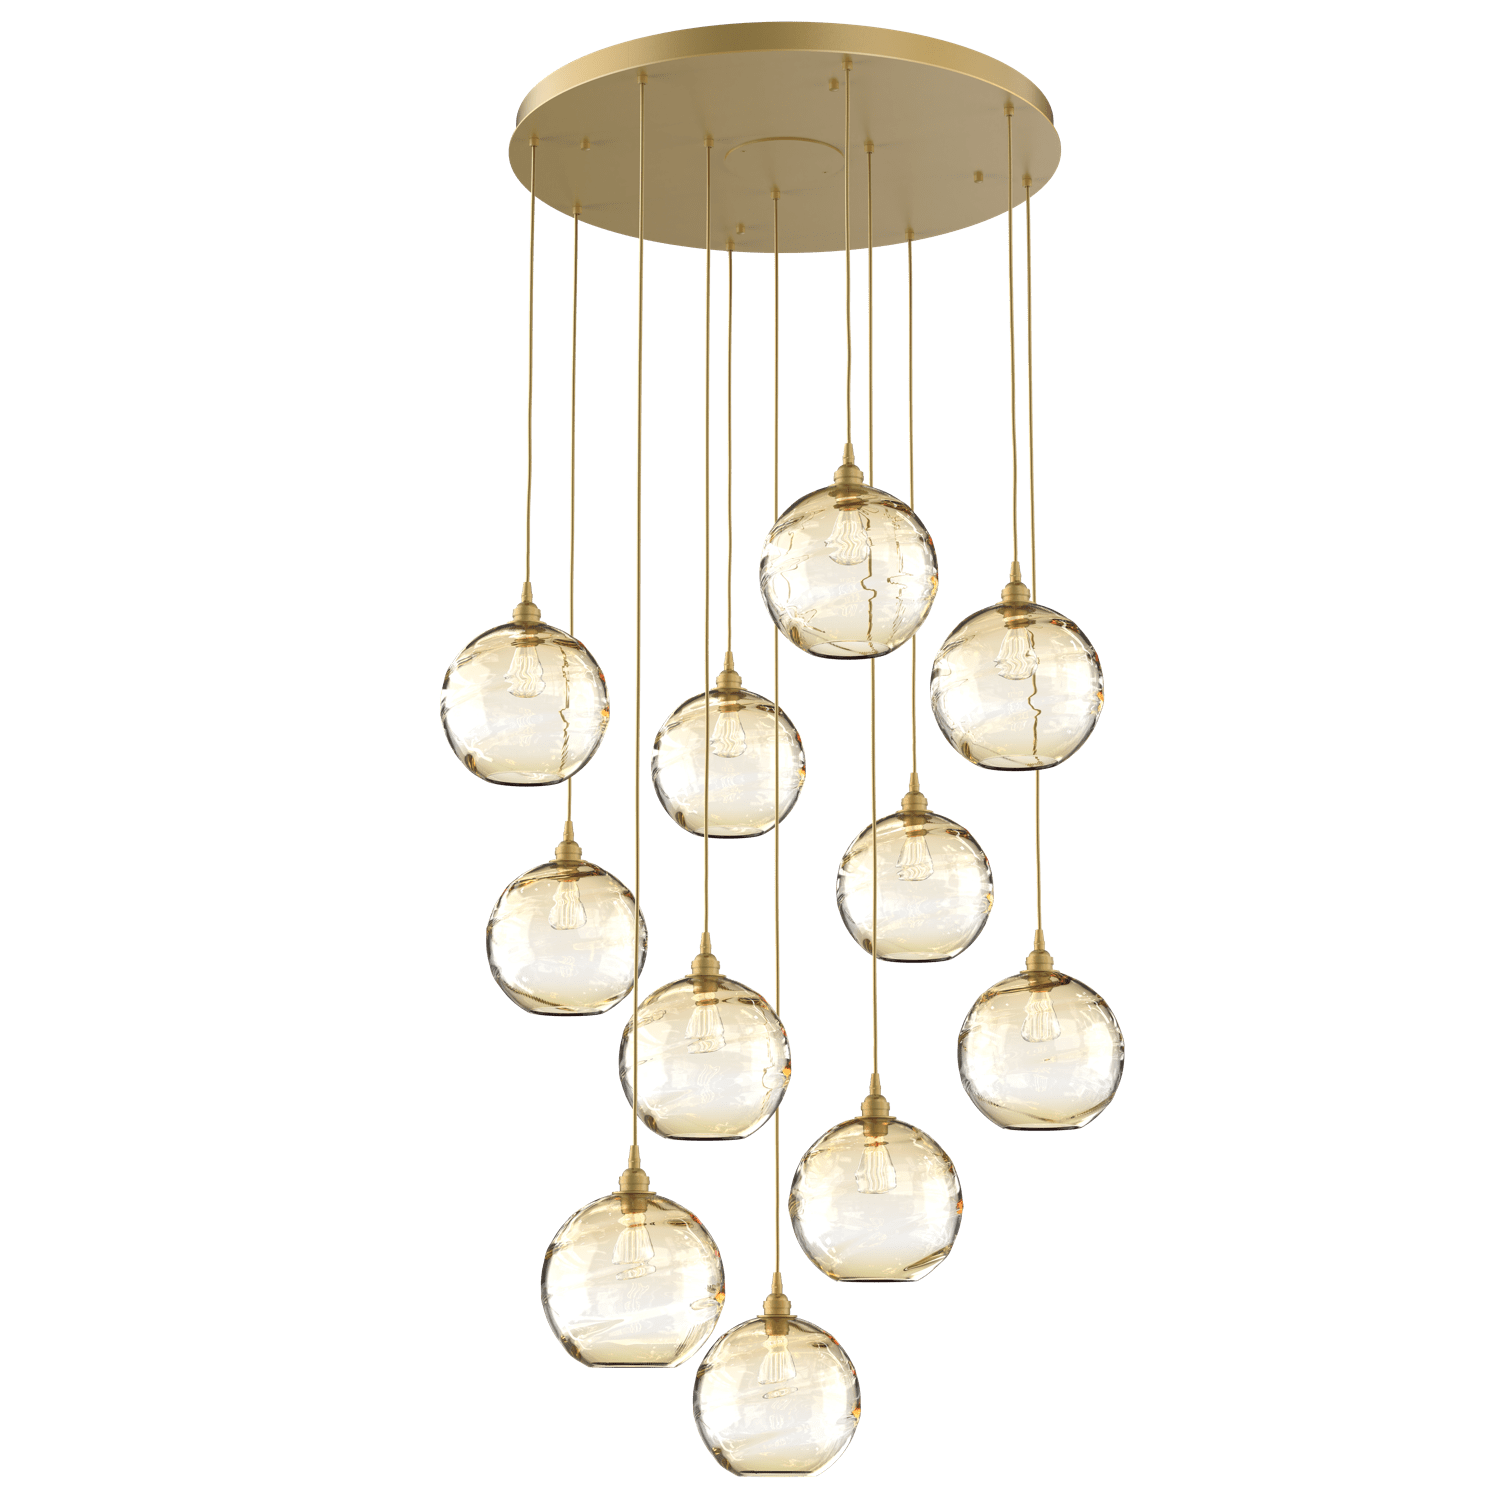 CHB0047-11-GB-OA-Hammerton-Studio-Optic-Blown-Glass-Terra-11-light-round-pendant-chandelier-with-gilded-brass-finish-and-optic-amber-blown-glass-shades-and-incandescent-lamping